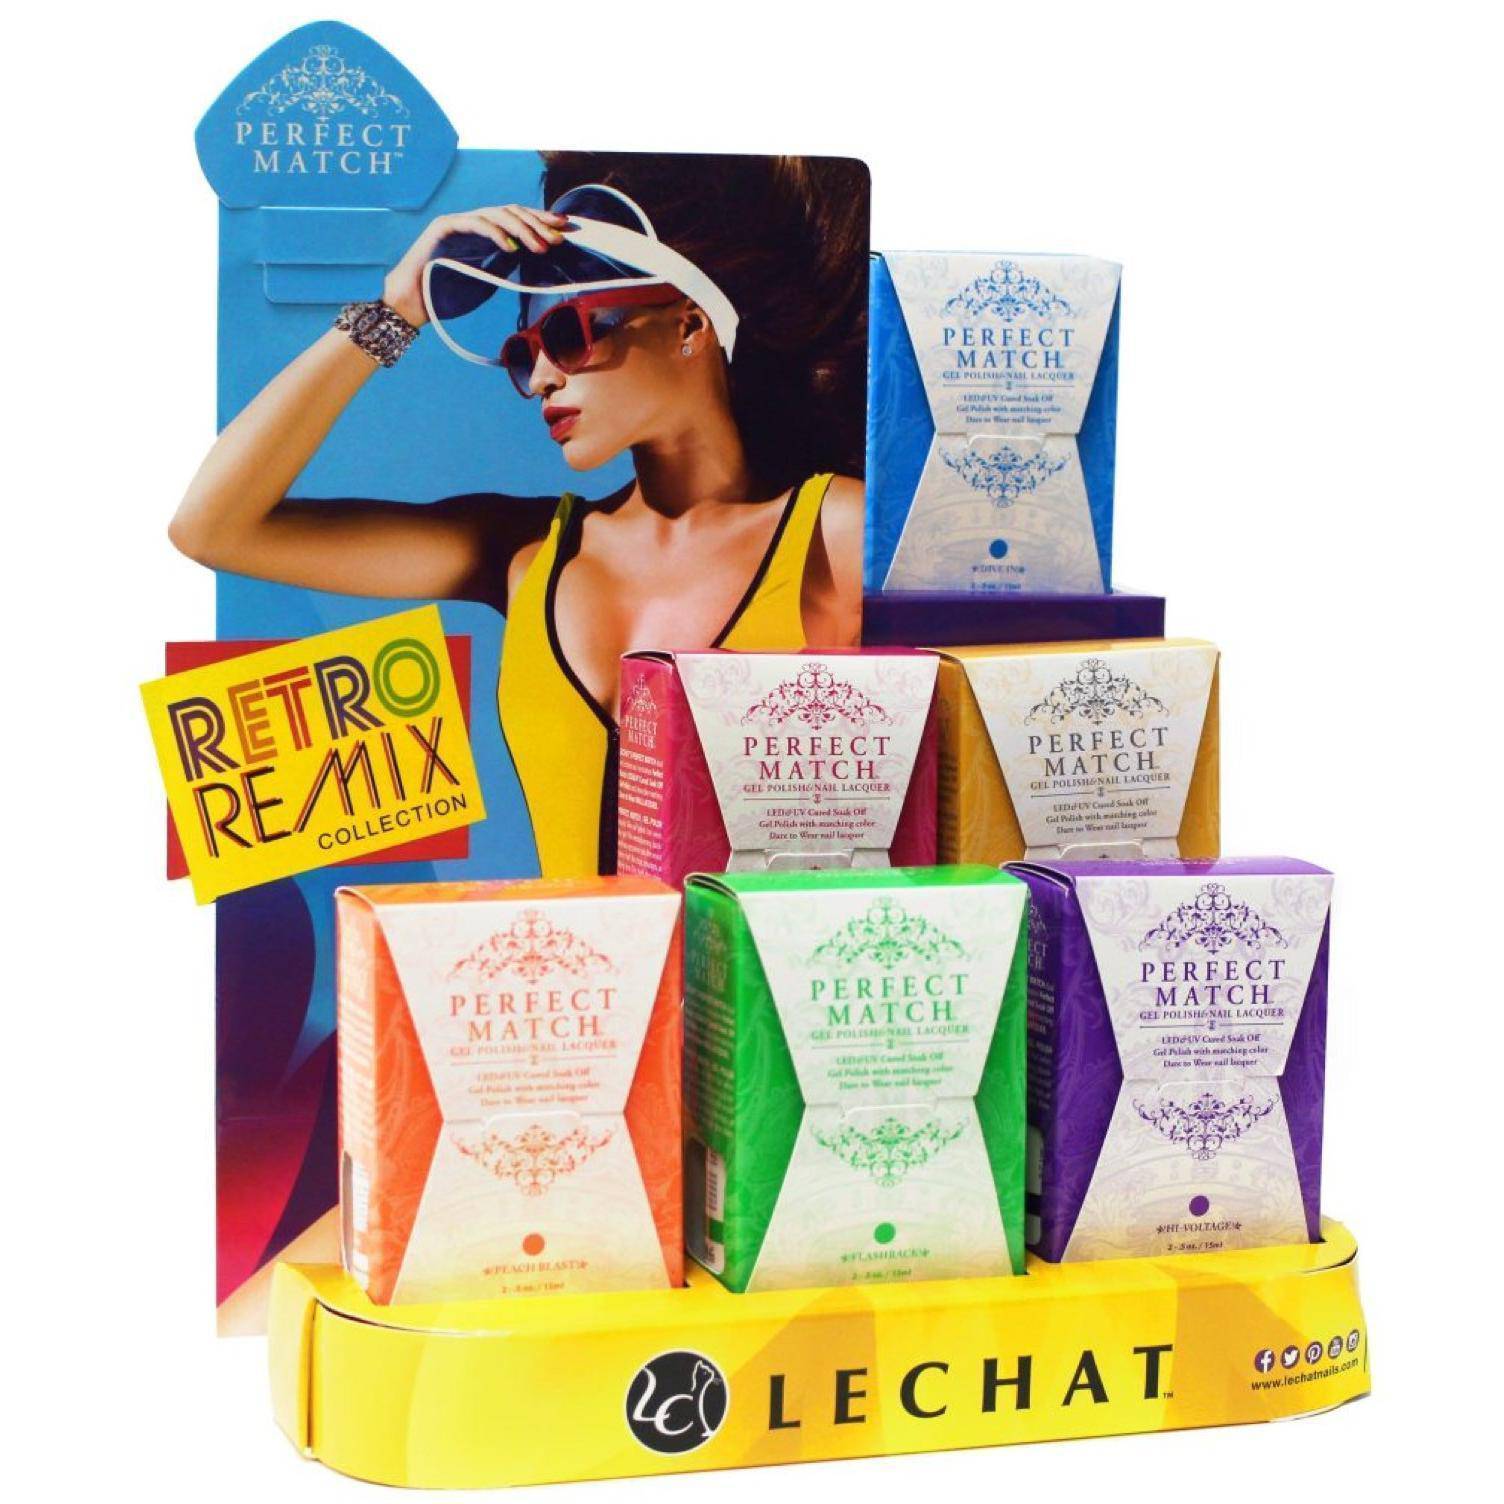 LeChat Perfect Match Gel + Matching Lacquer Retro Remix Collection #199 - #204 - Universal Nail Supplies